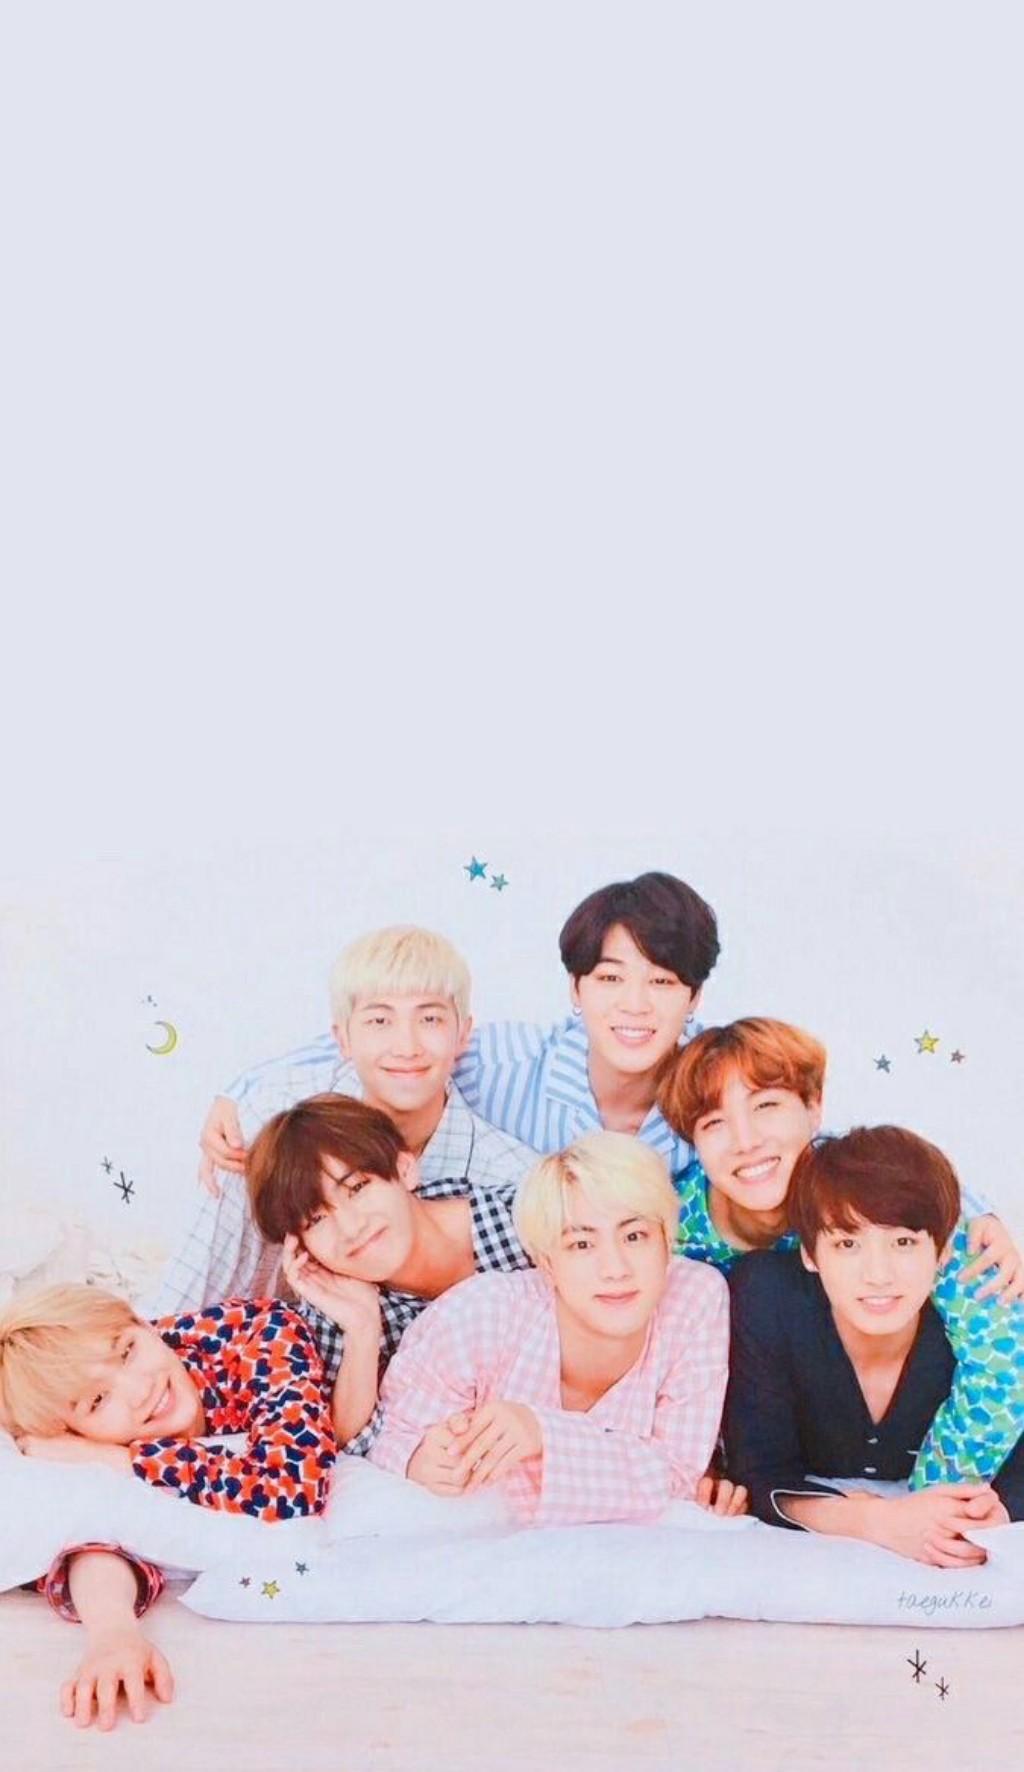 BTS Wallpaper HD 2020 for Android